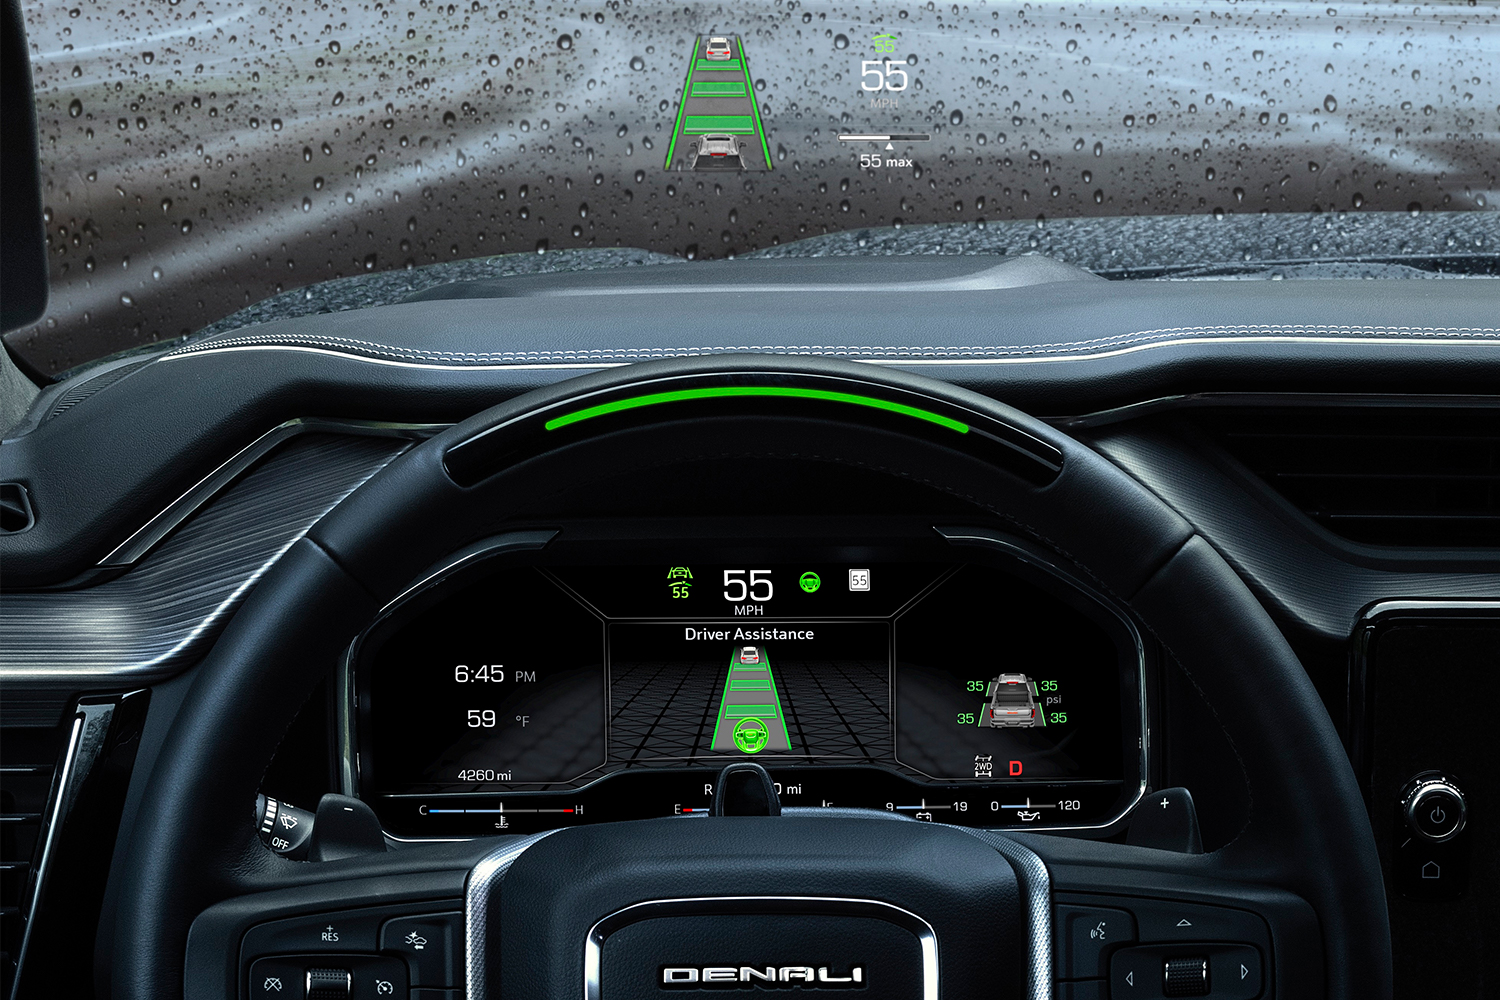 The Super Cruise technology and head-up display shown on the dash and windshield of the GMC Sierra Denali Ultimate pickup truck